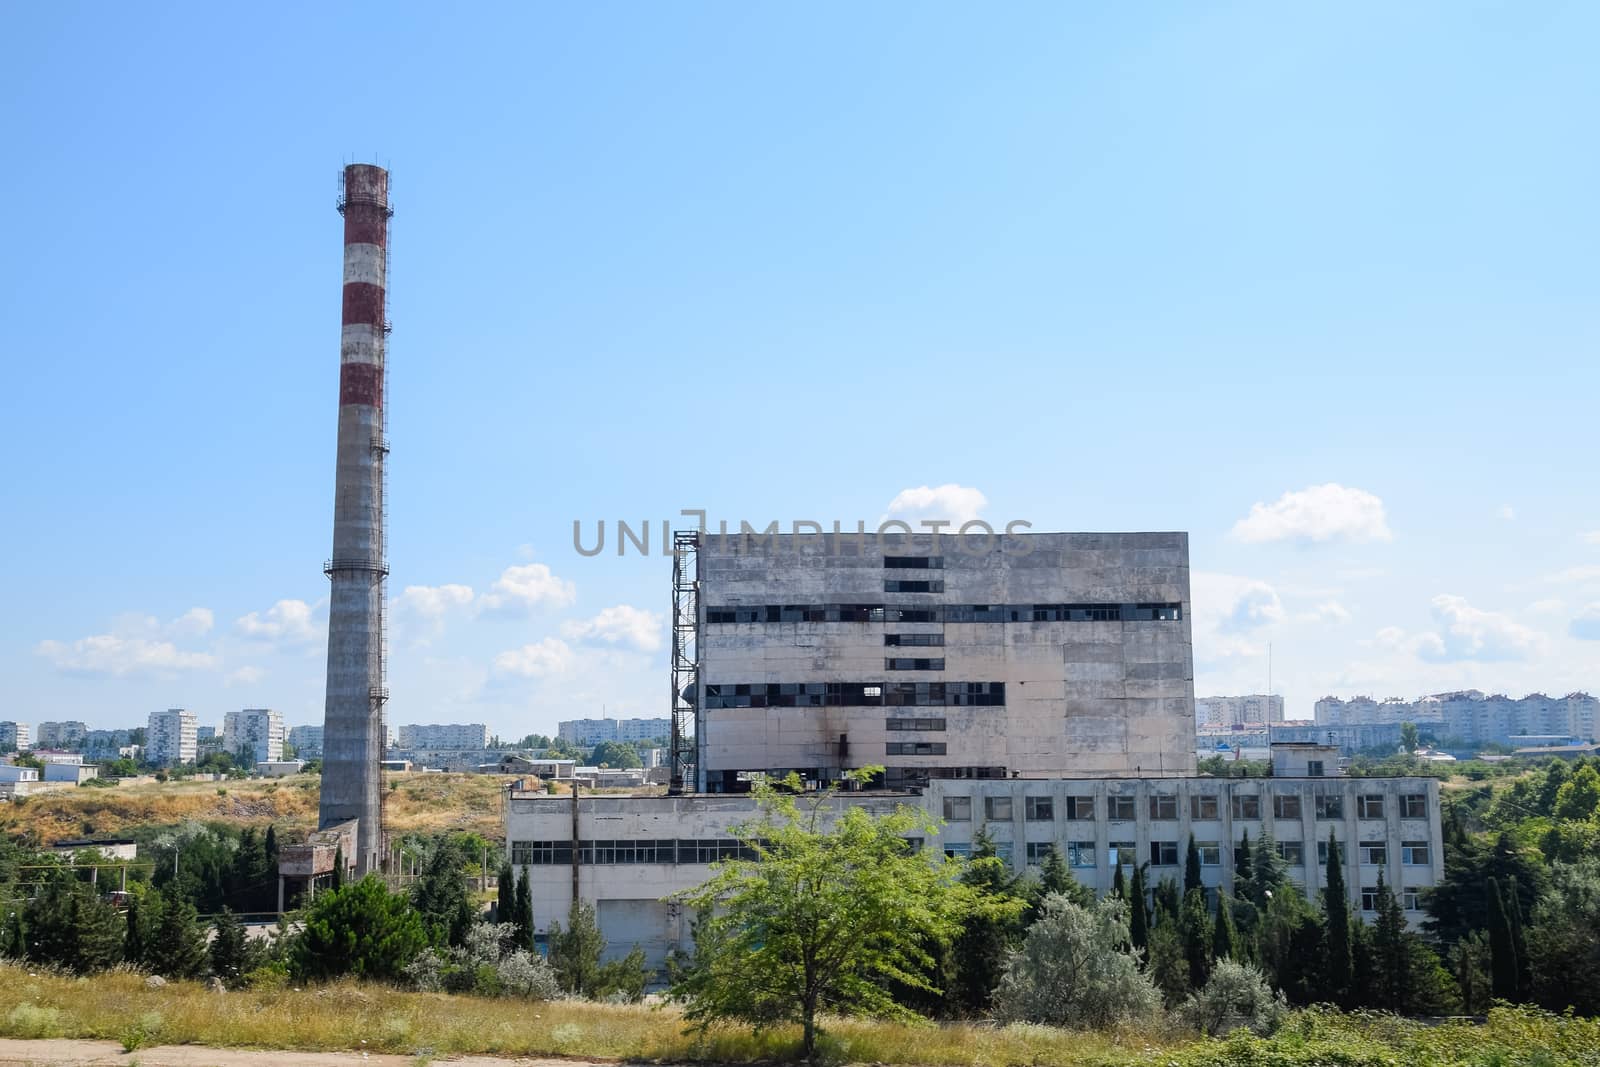 An old Soviet factory with a pipe. Abandoned Soviet industry.